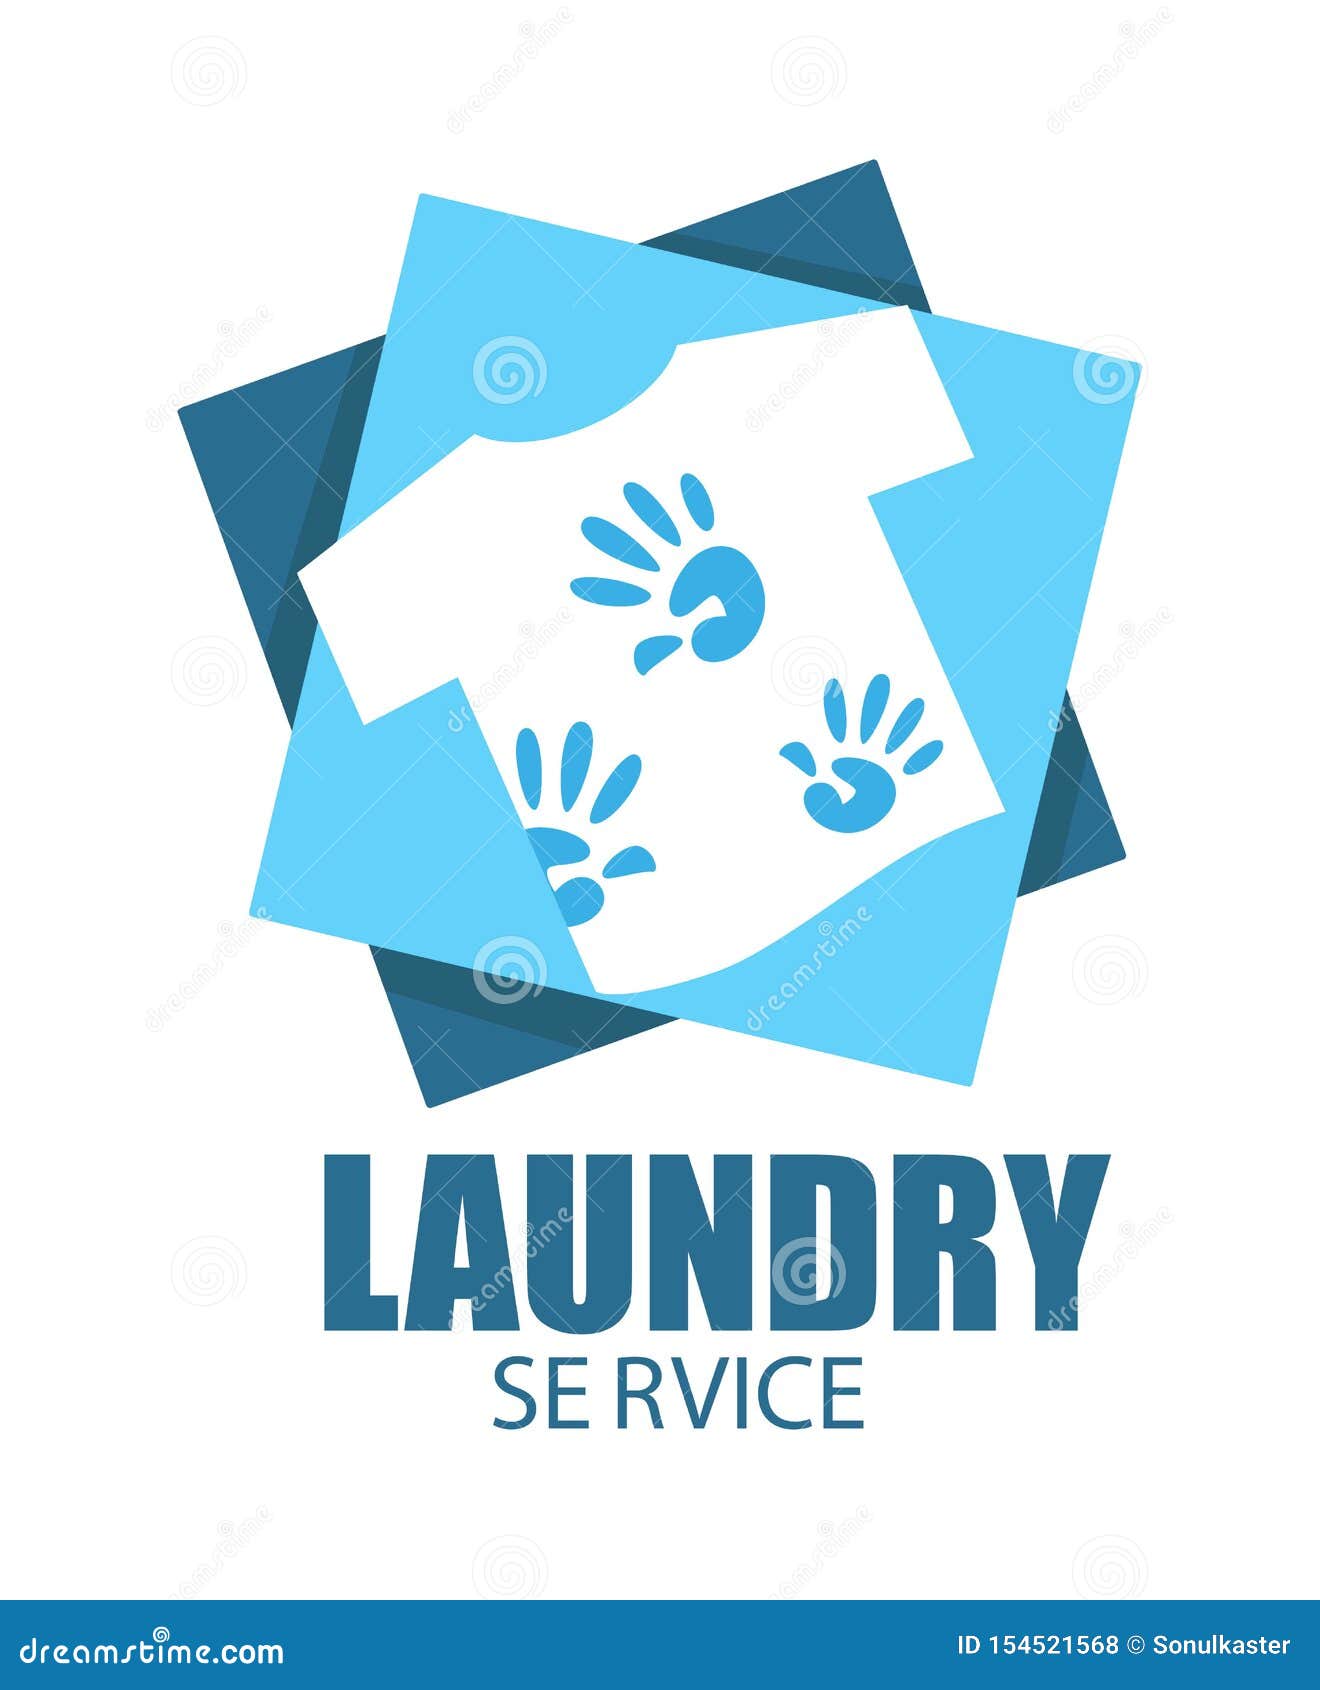 Laundry Service Dirty T Shirt With Stains Clothes Washing Stock